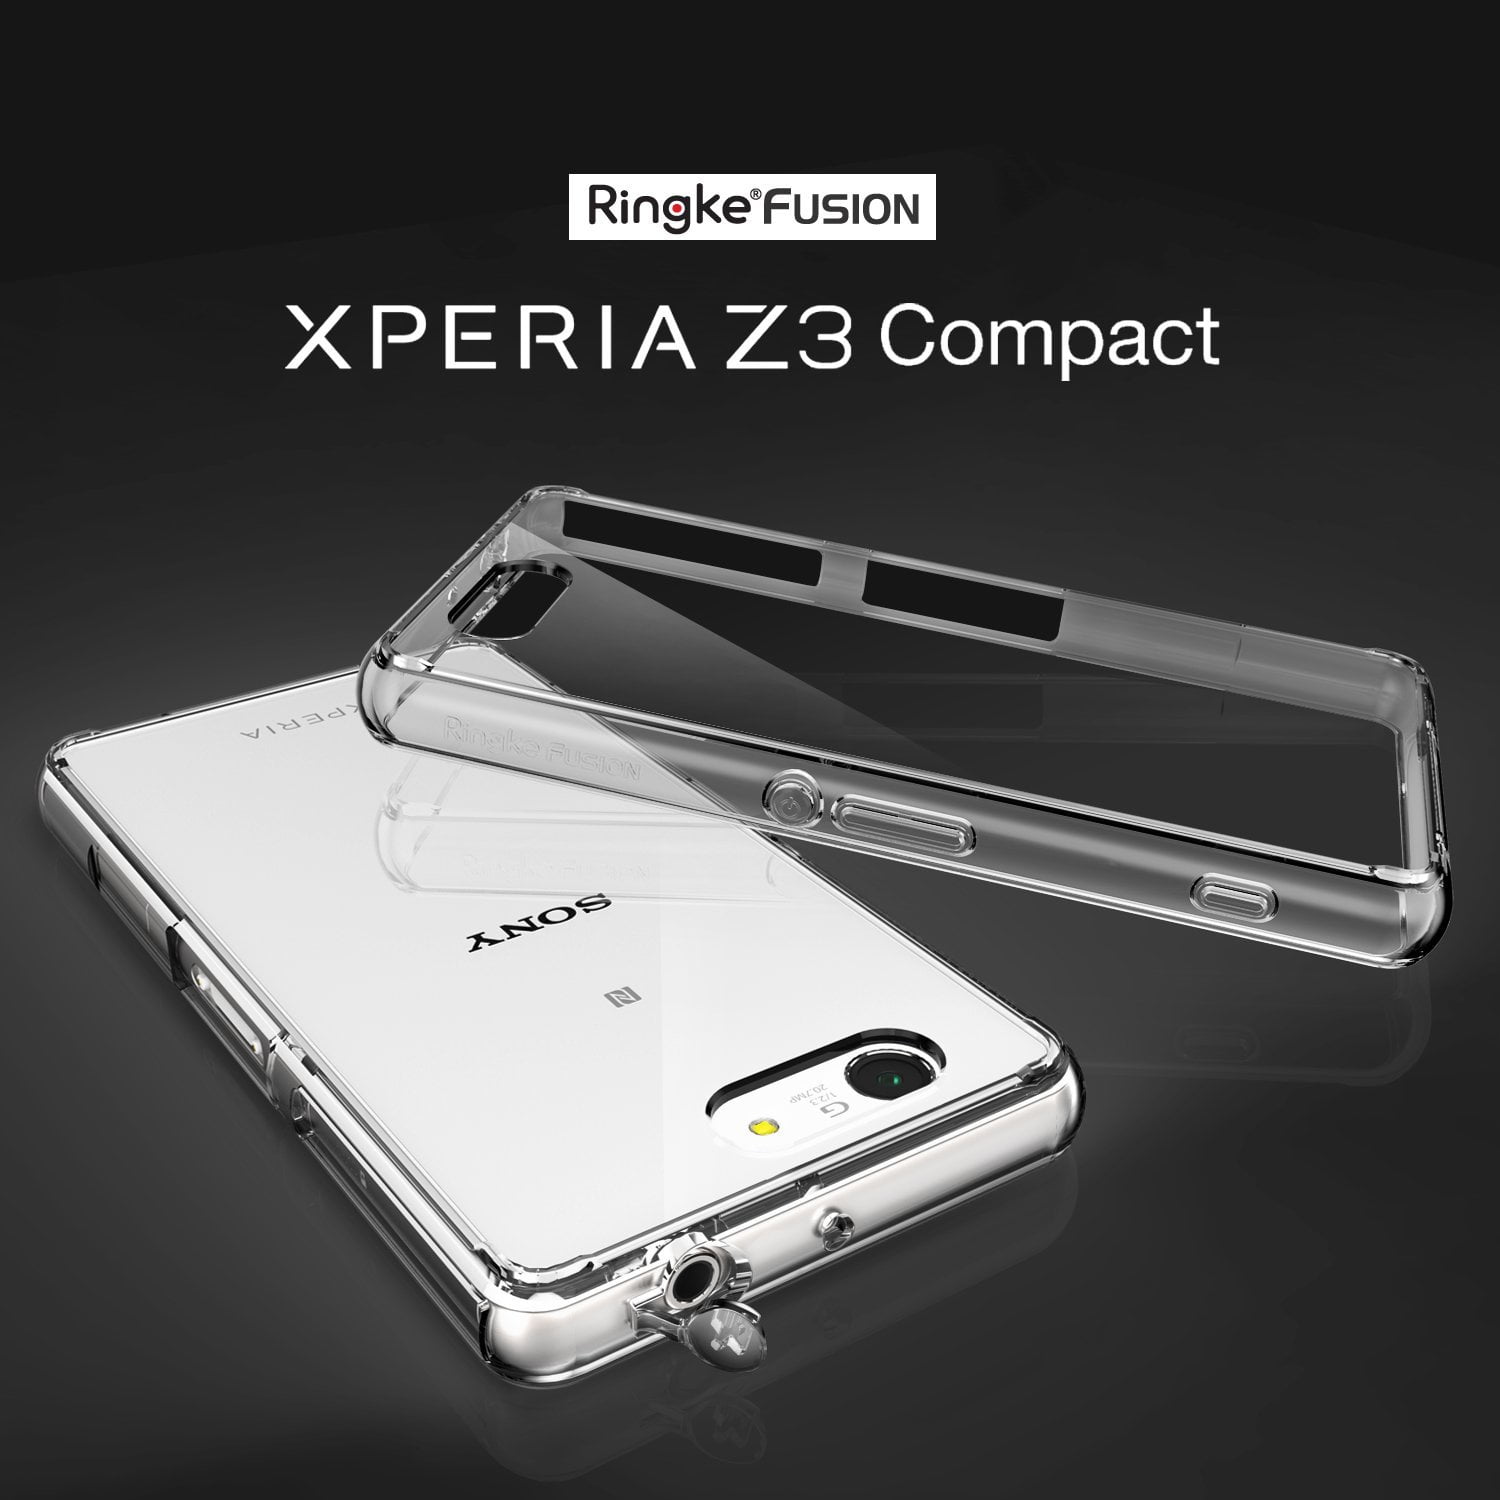 gek geworden Schatting Allergie Ringke Fusion Case Compatible with Sony Xperia Z3 Compact, Transparent PC  Back TPU Bumper Drop Protection Phone Cover - Clear - Walmart.com